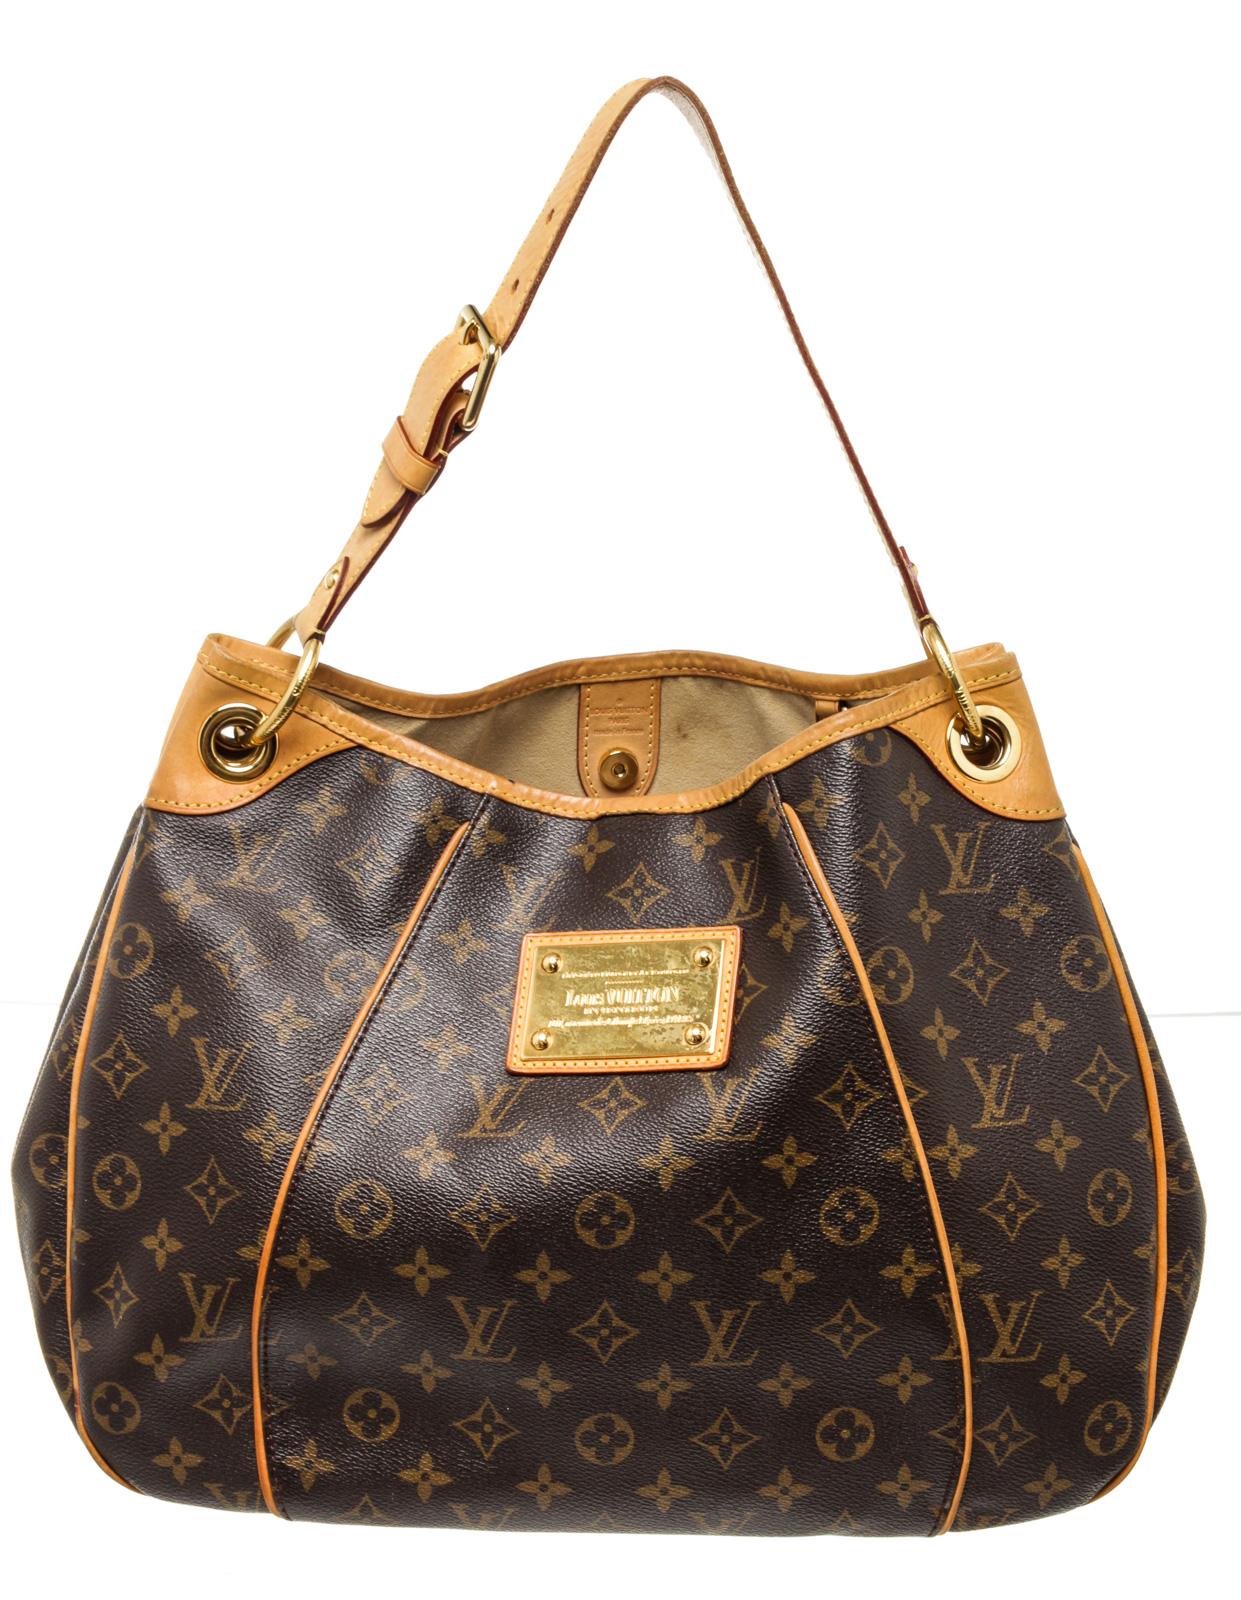 Louis Vuitton Brown Monogram Galliera PM Hobos Bag In Good Condition For Sale In Irvine, CA